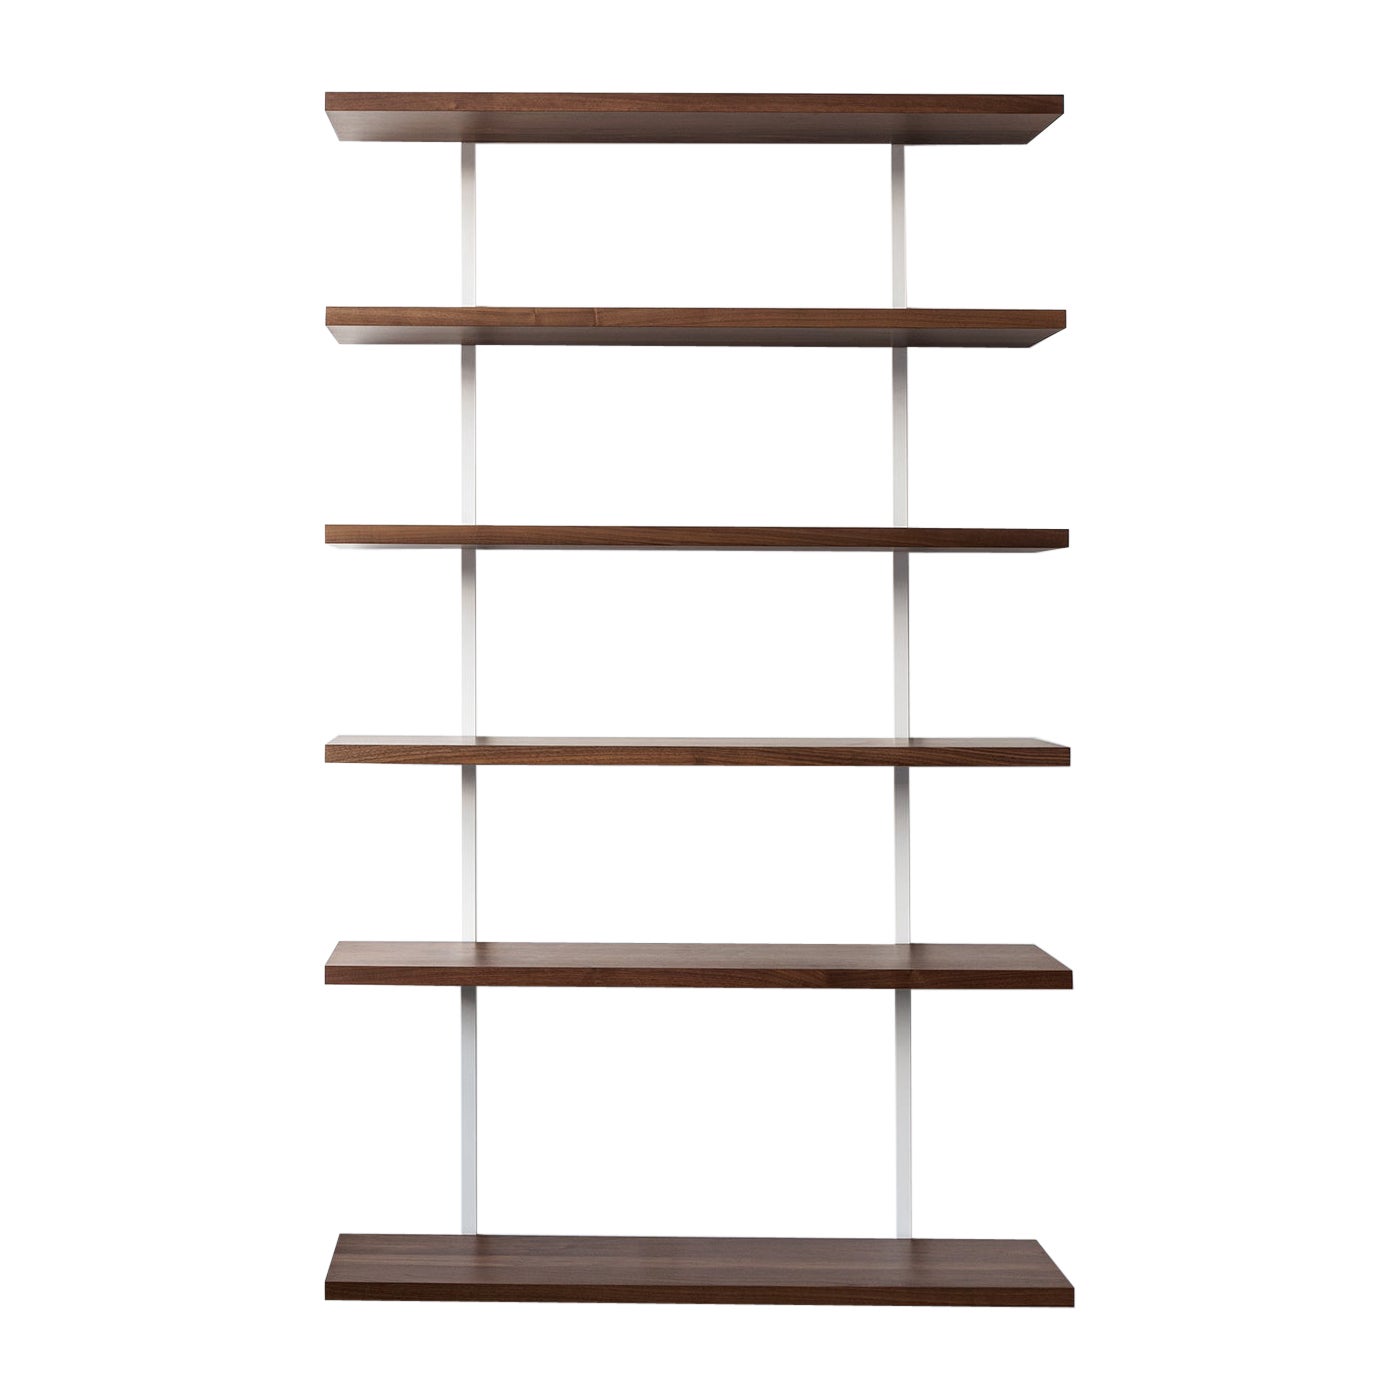 AS6 wall unit 48" wide shelves in solid walnut and powder coated steel For Sale